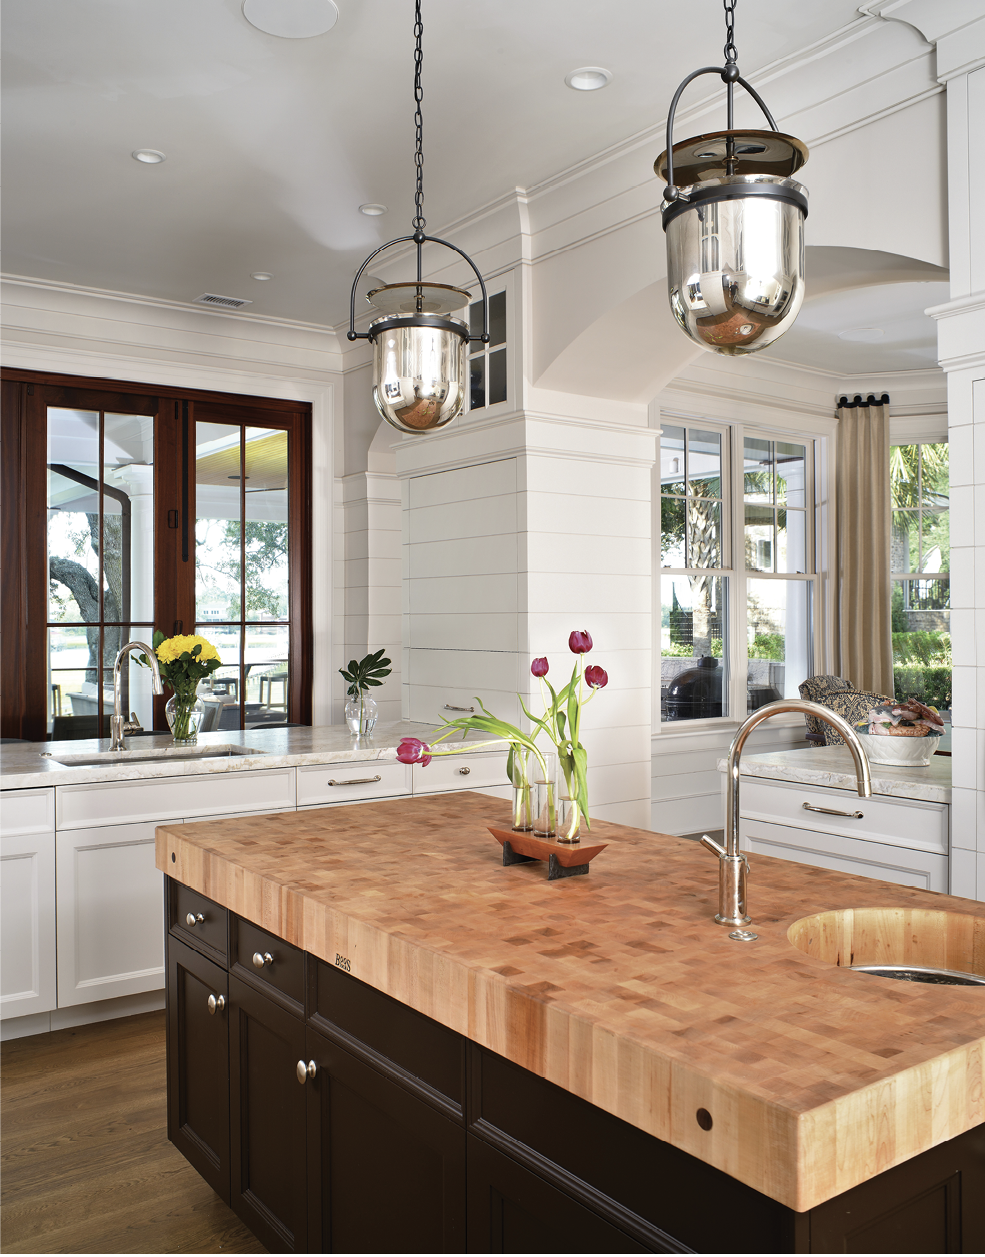 The kitchen features a Boos Block island and industrial-style pendant lights from Urban Electric.